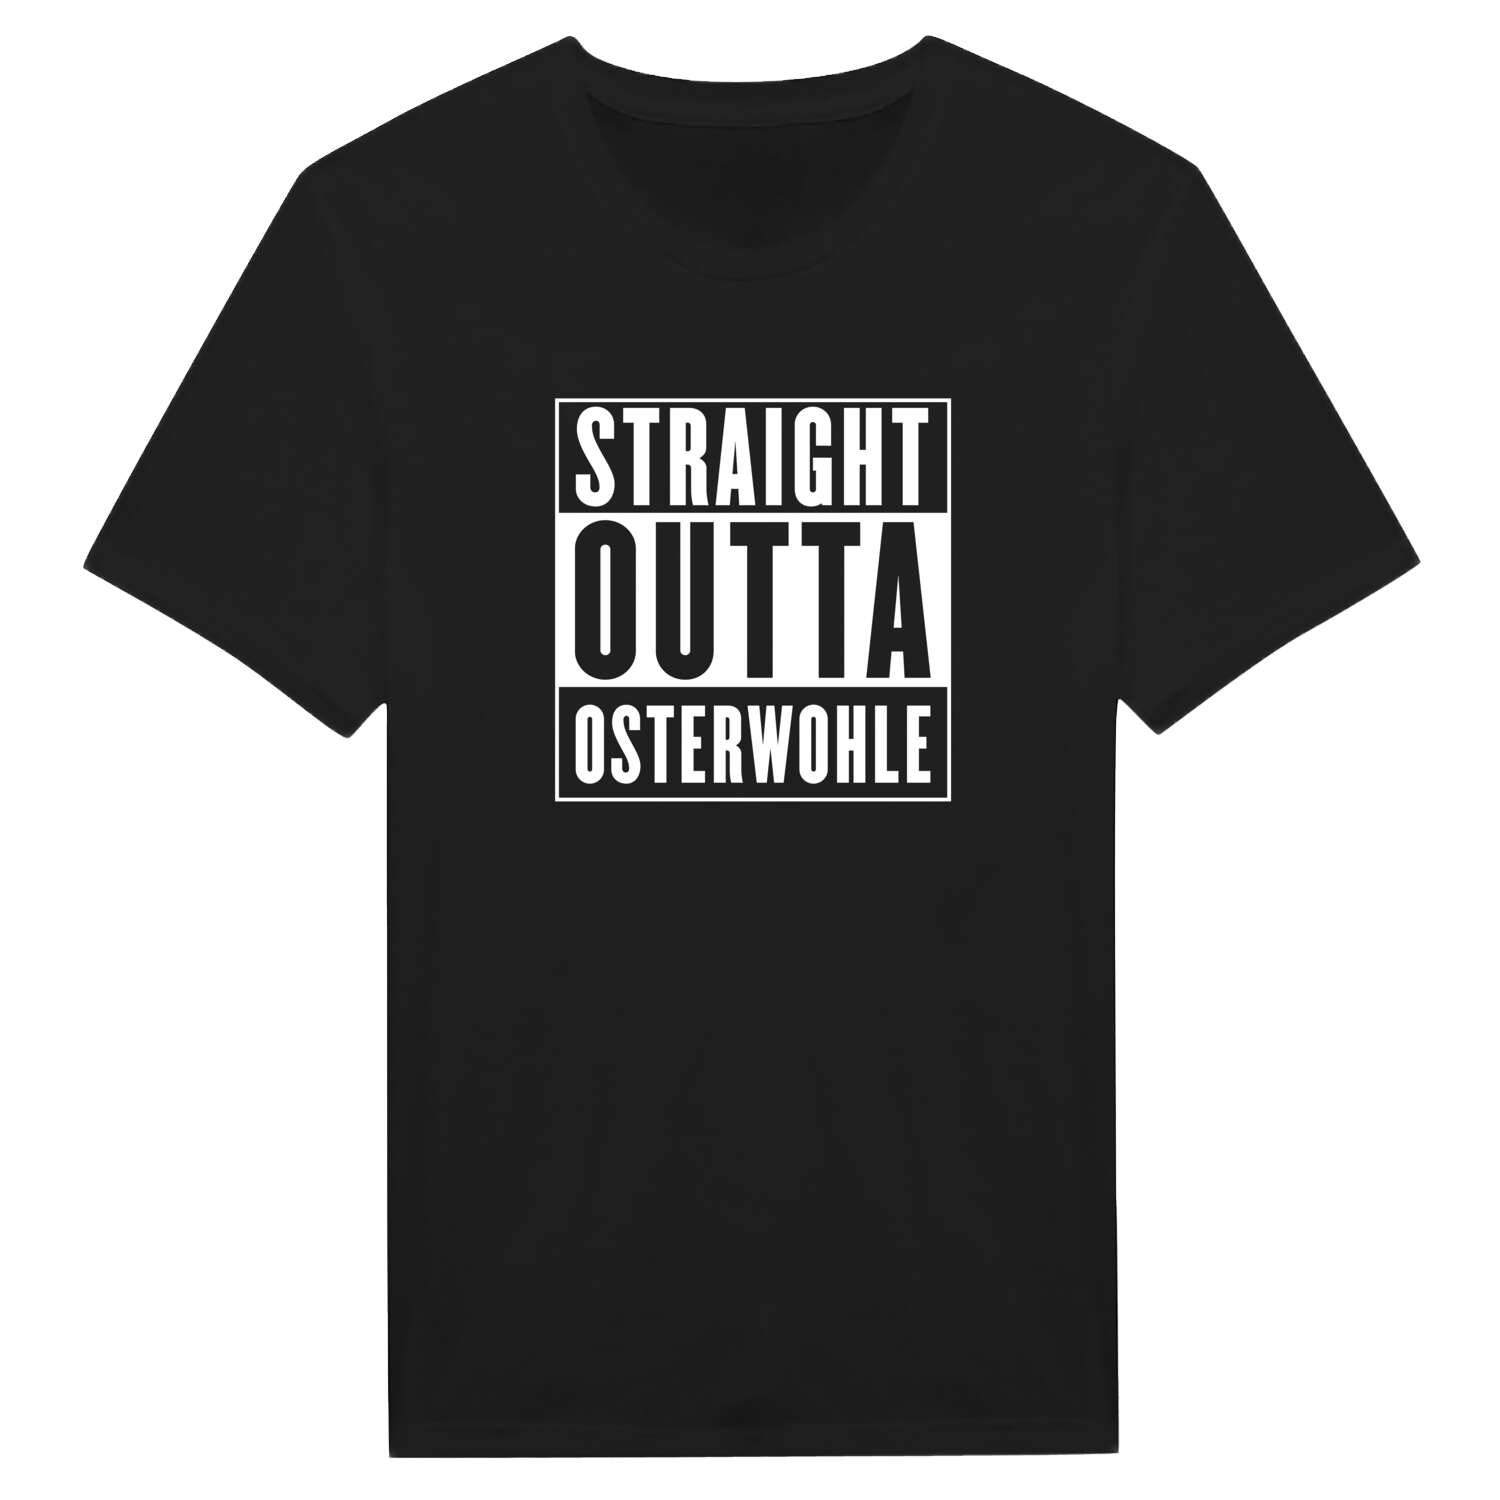 Osterwohle T-Shirt »Straight Outta«